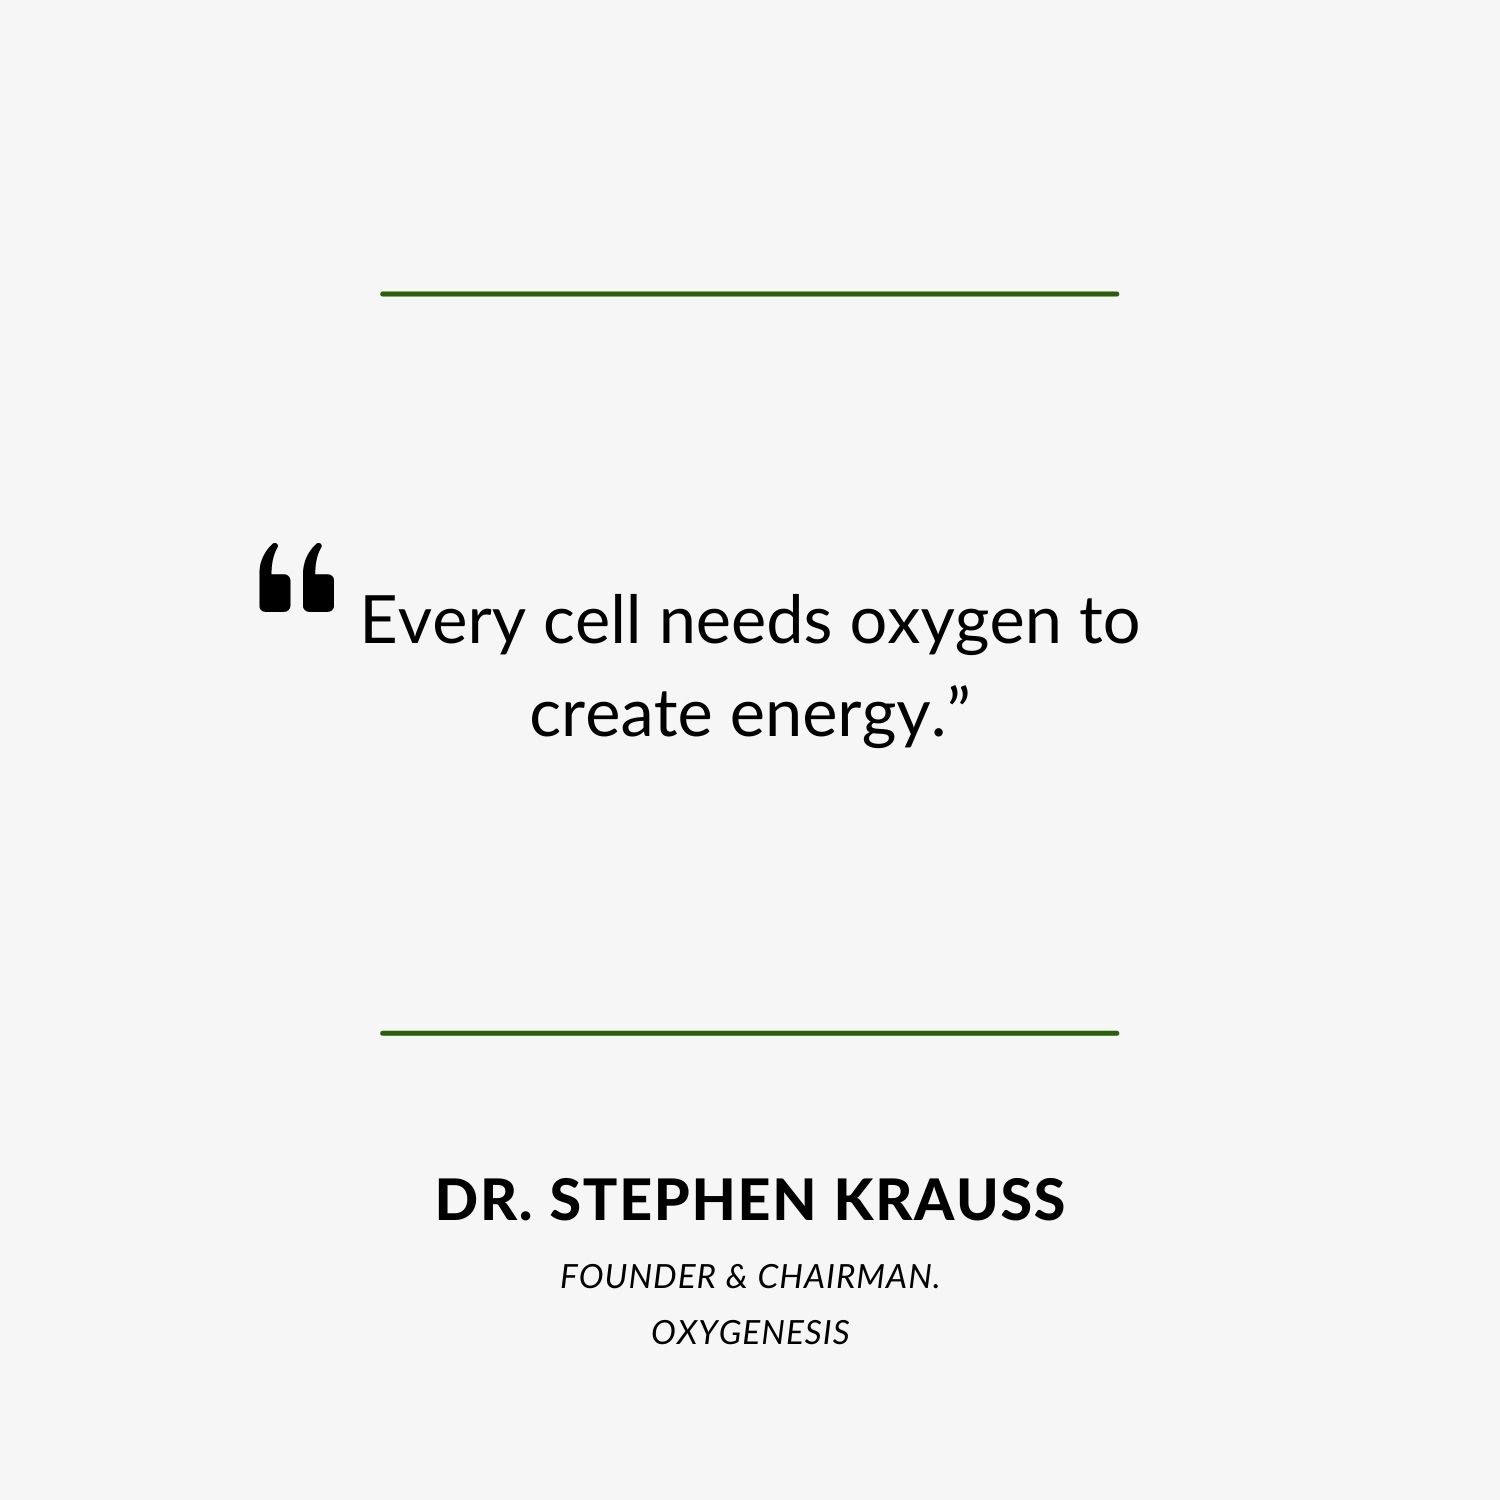 “Every cell needs oxygen to create energy.” - Dr. Stephen Krauss